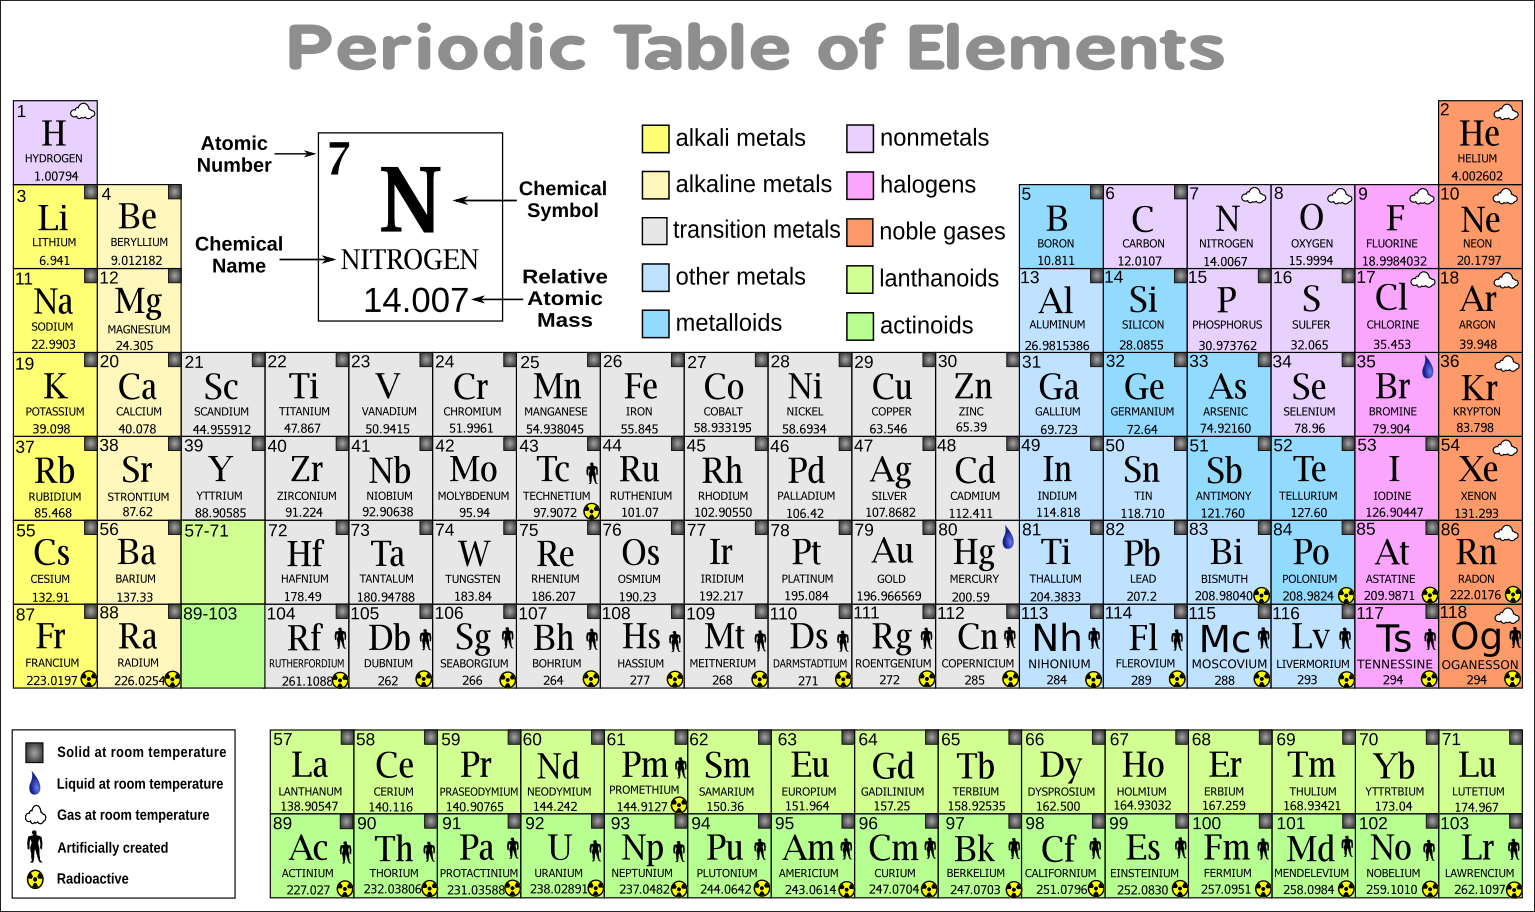 element definition and example